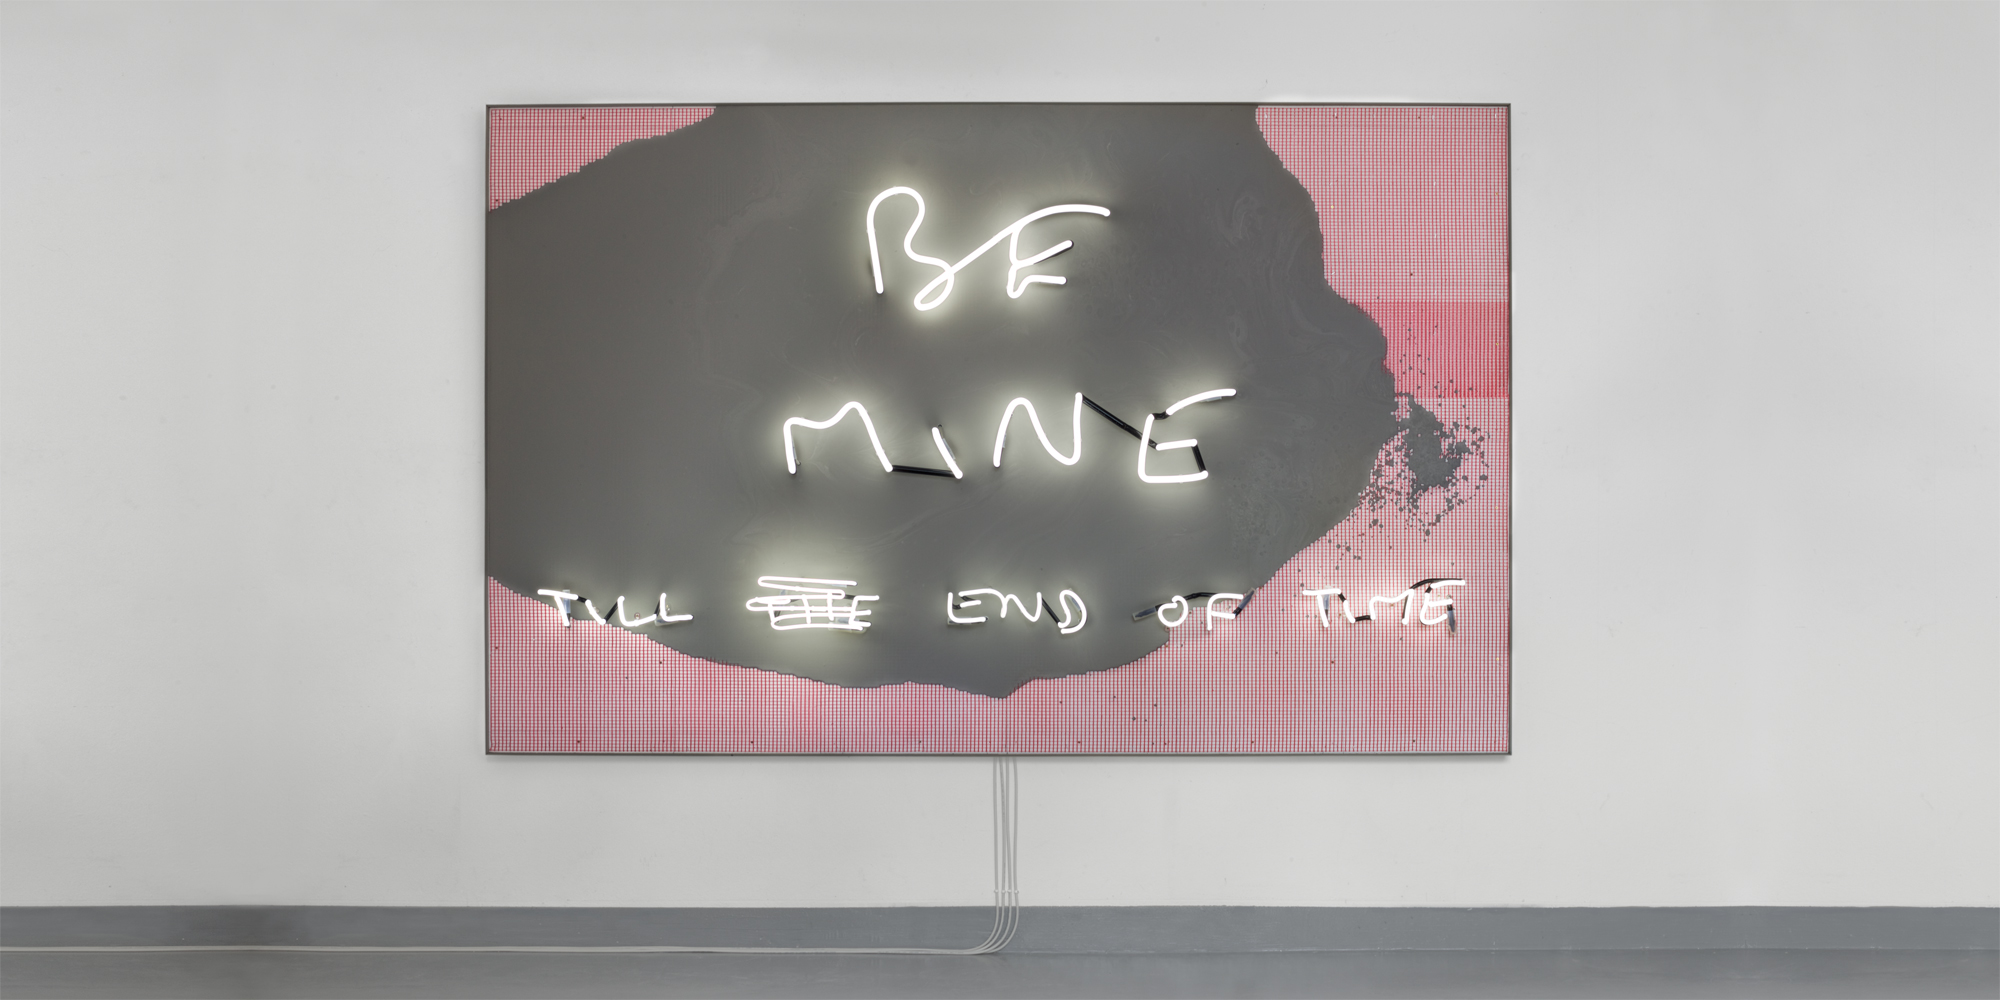 Be Mine (Till End of Time), 2019